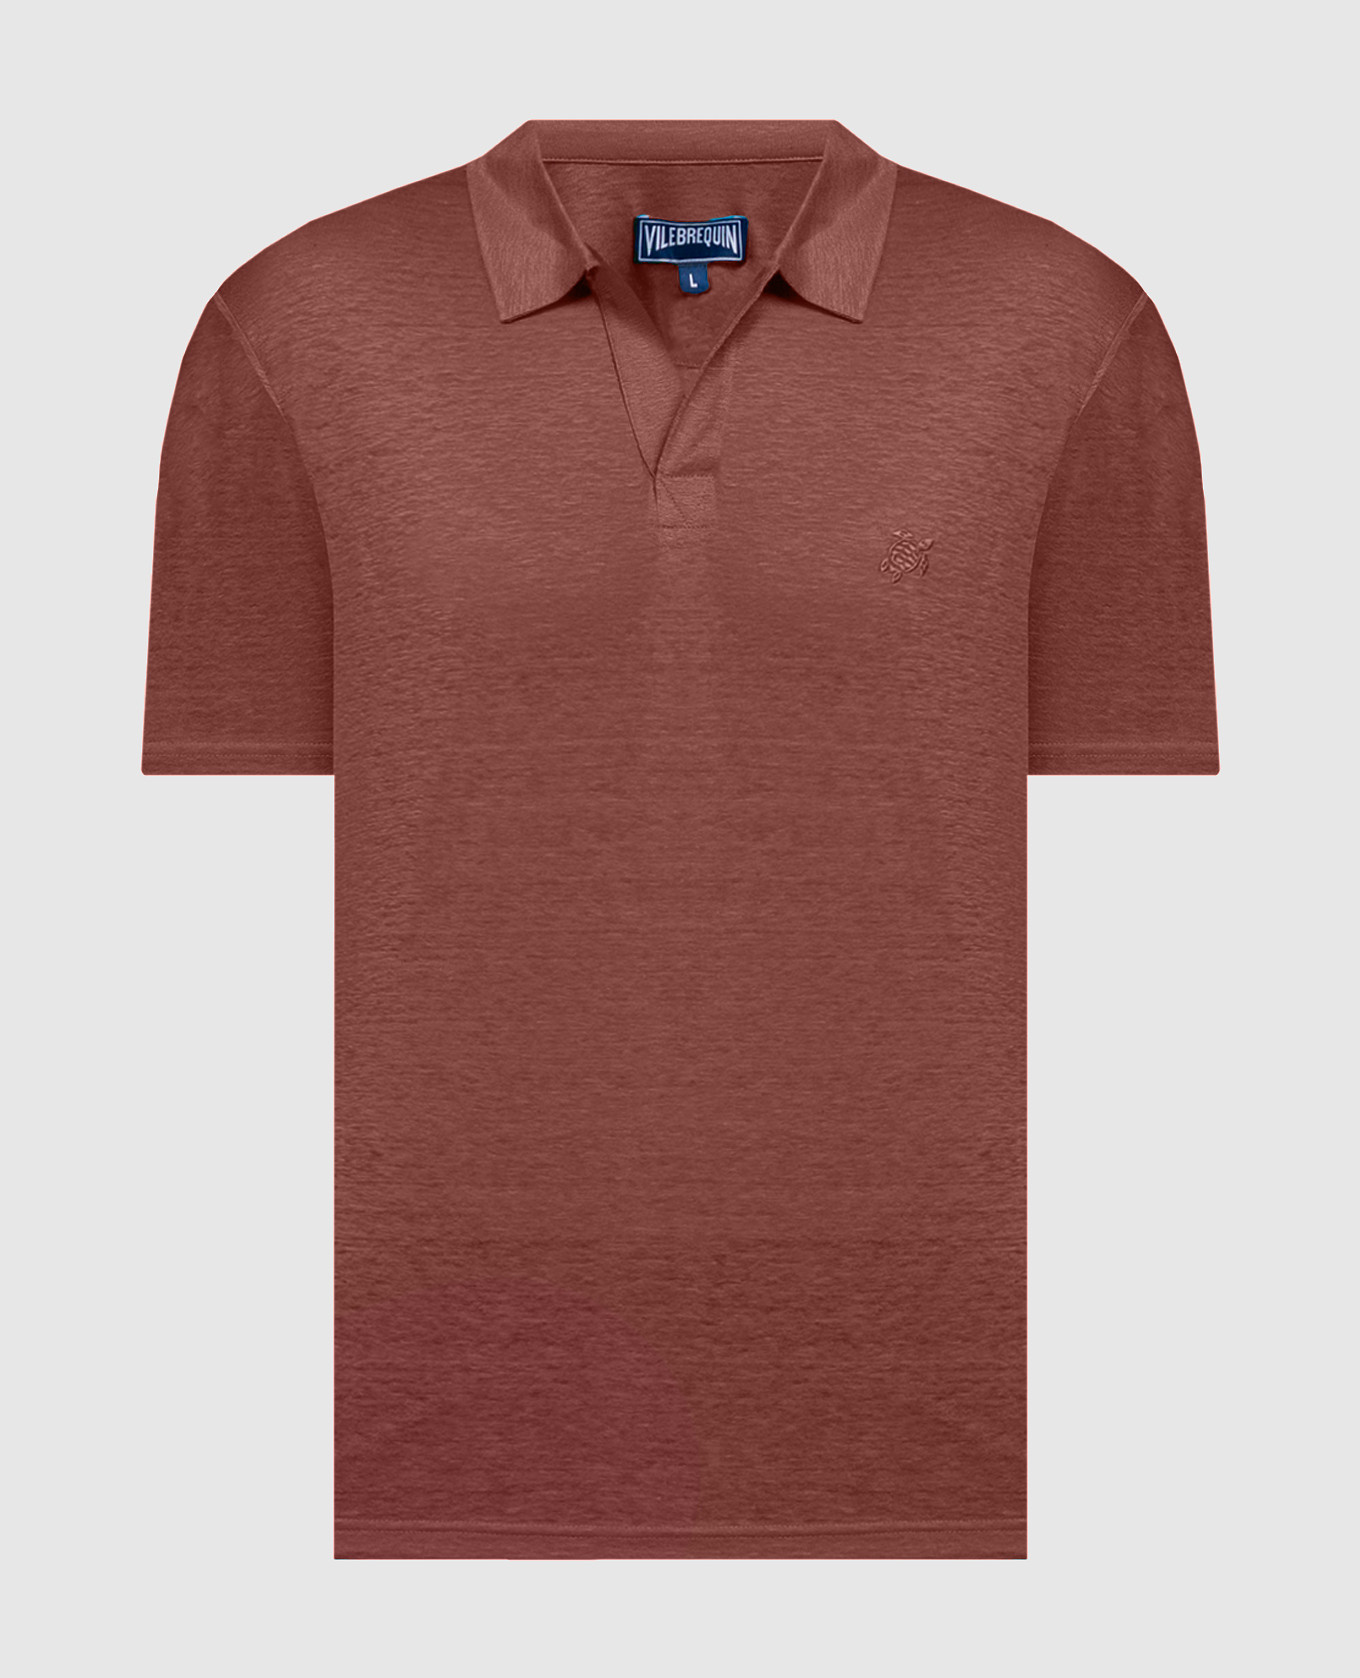 Brown linen t-shirt with logo embroidery